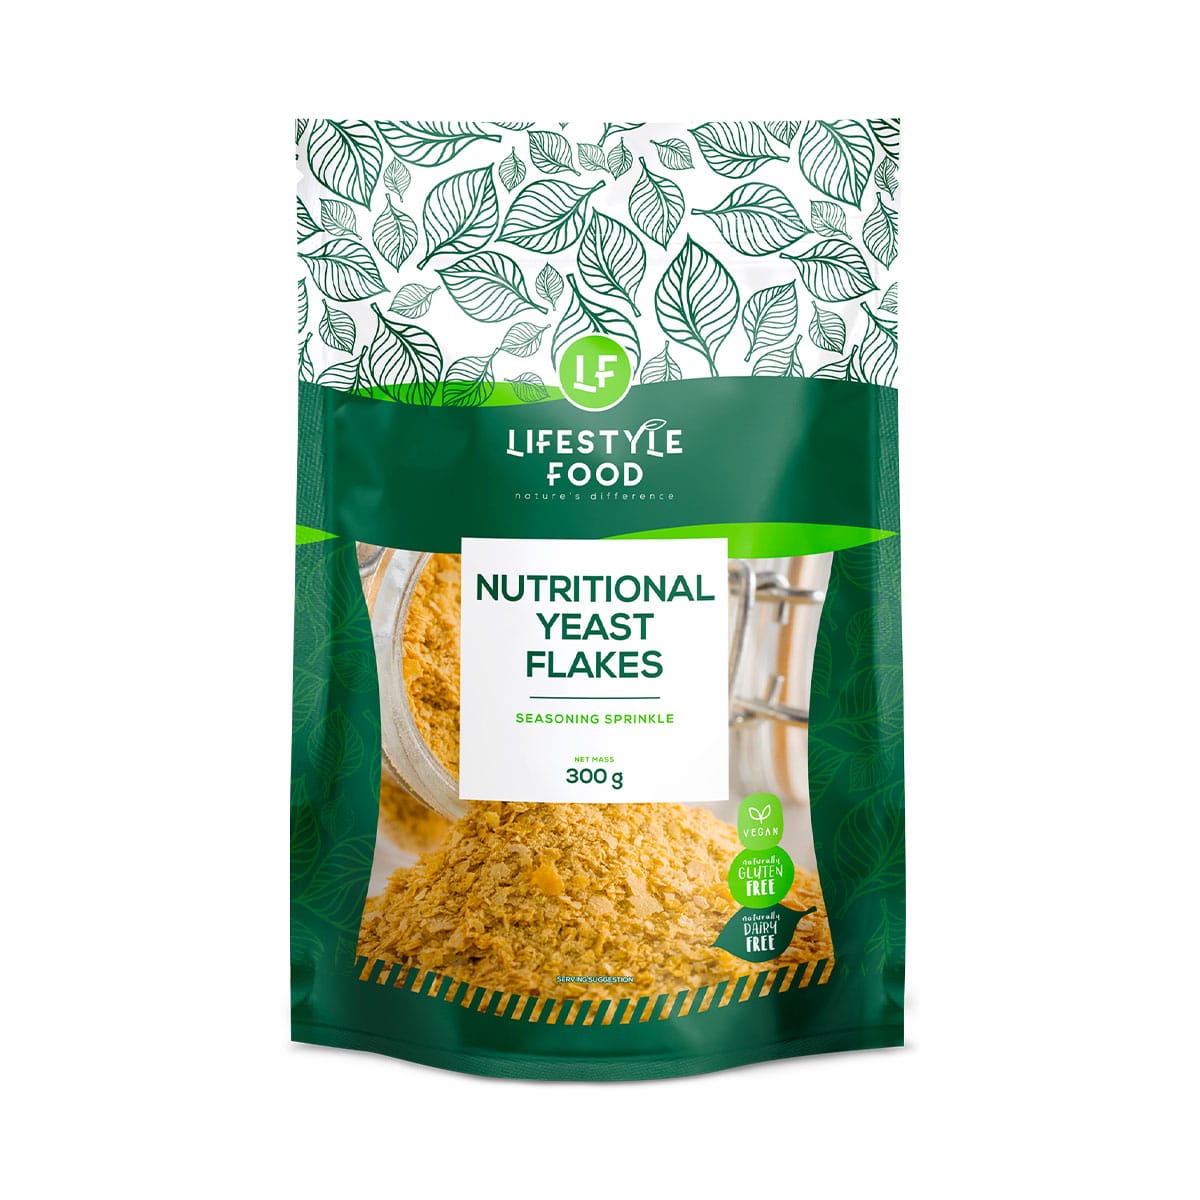 Lifestyle Food Nutritional Yeast Flakes - 300g